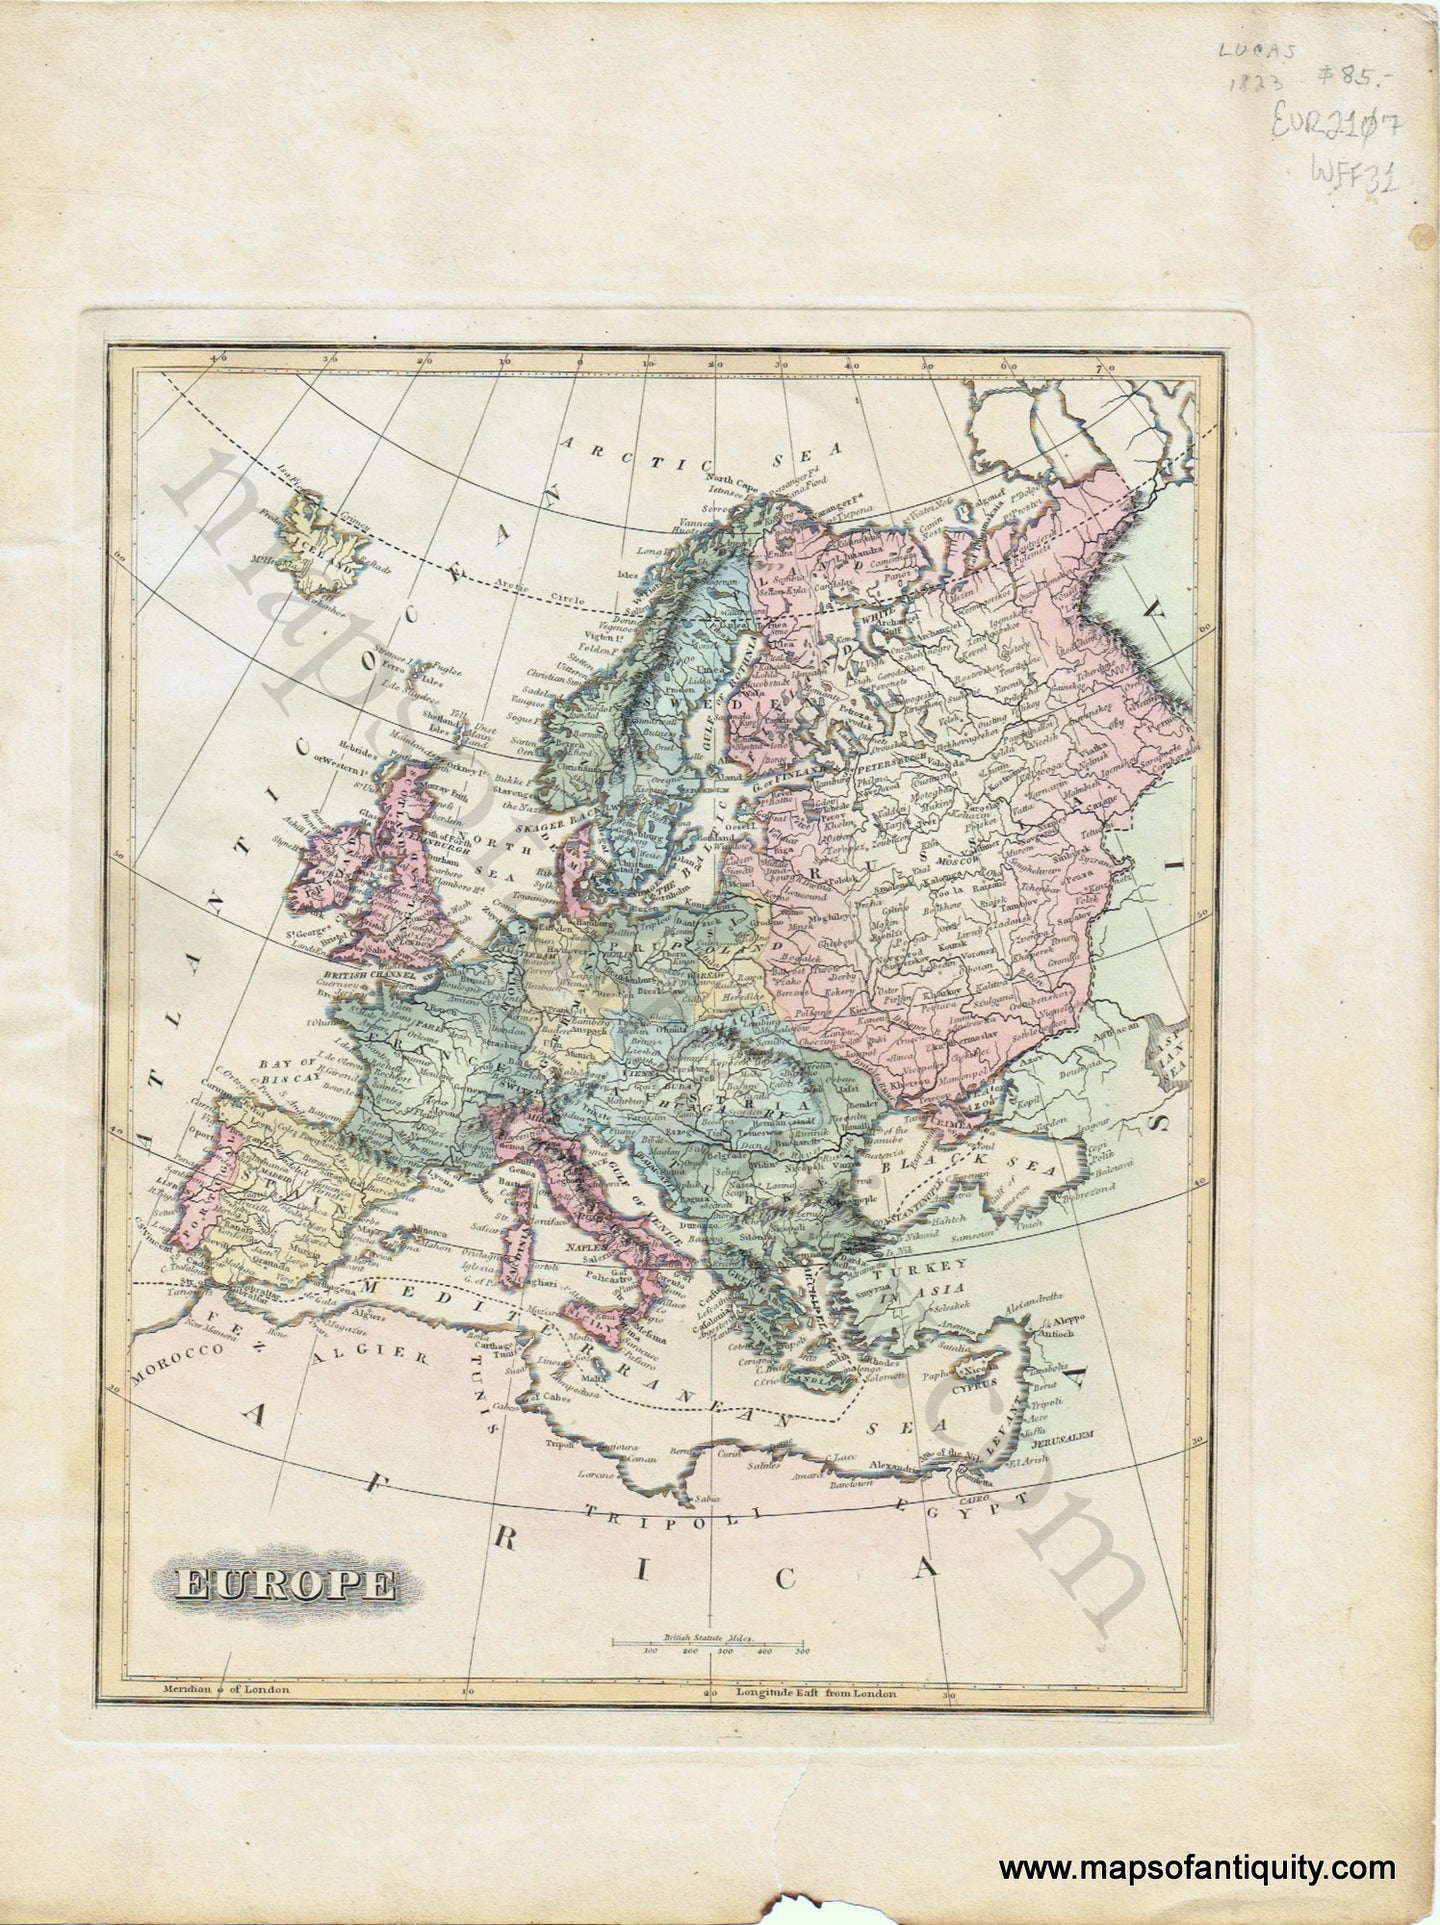 Antique-Hand-Colored-Map-Europe-**********-Europe-Europe-General-1823-Lucas-Maps-Of-Antiquity